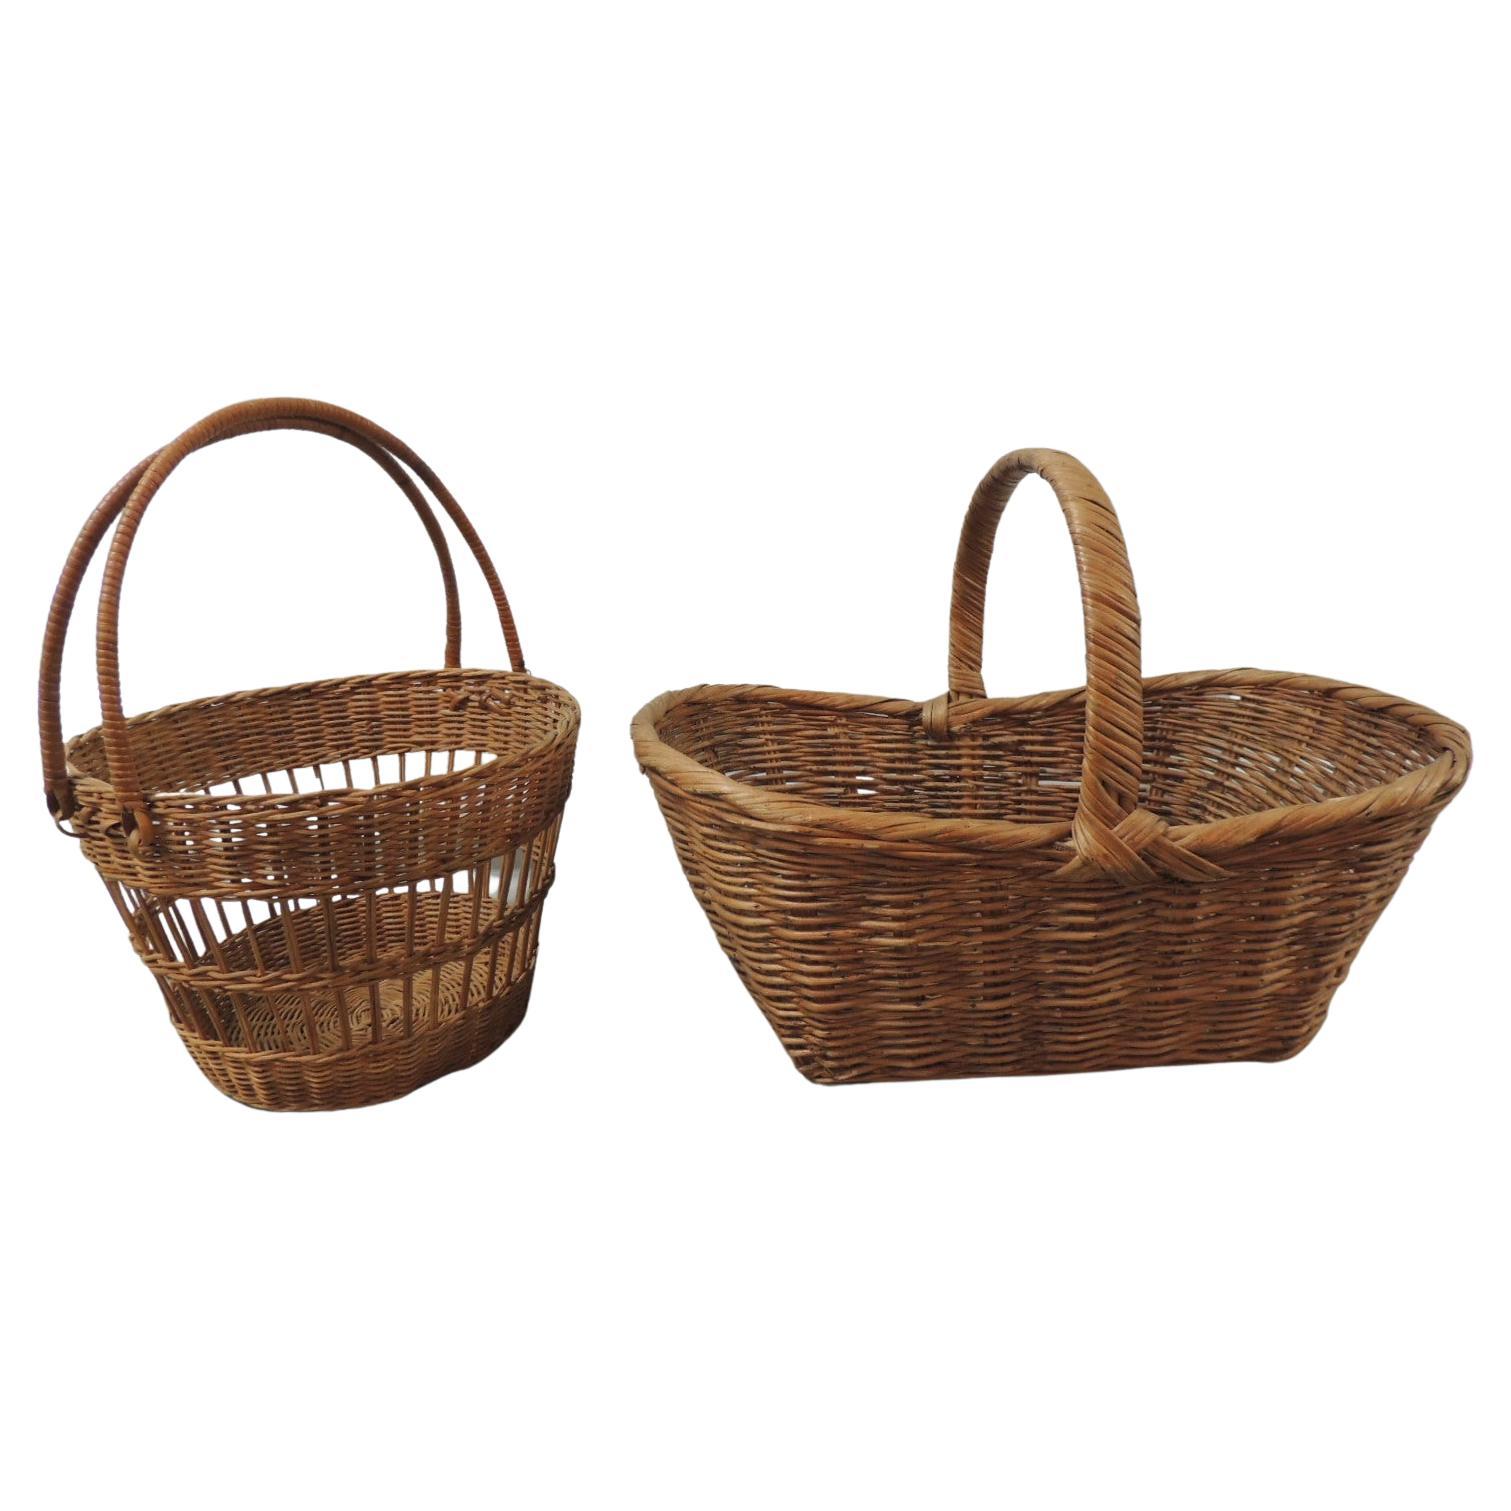 Set of '2' Woven Decorative Baskets with Handles For Sale